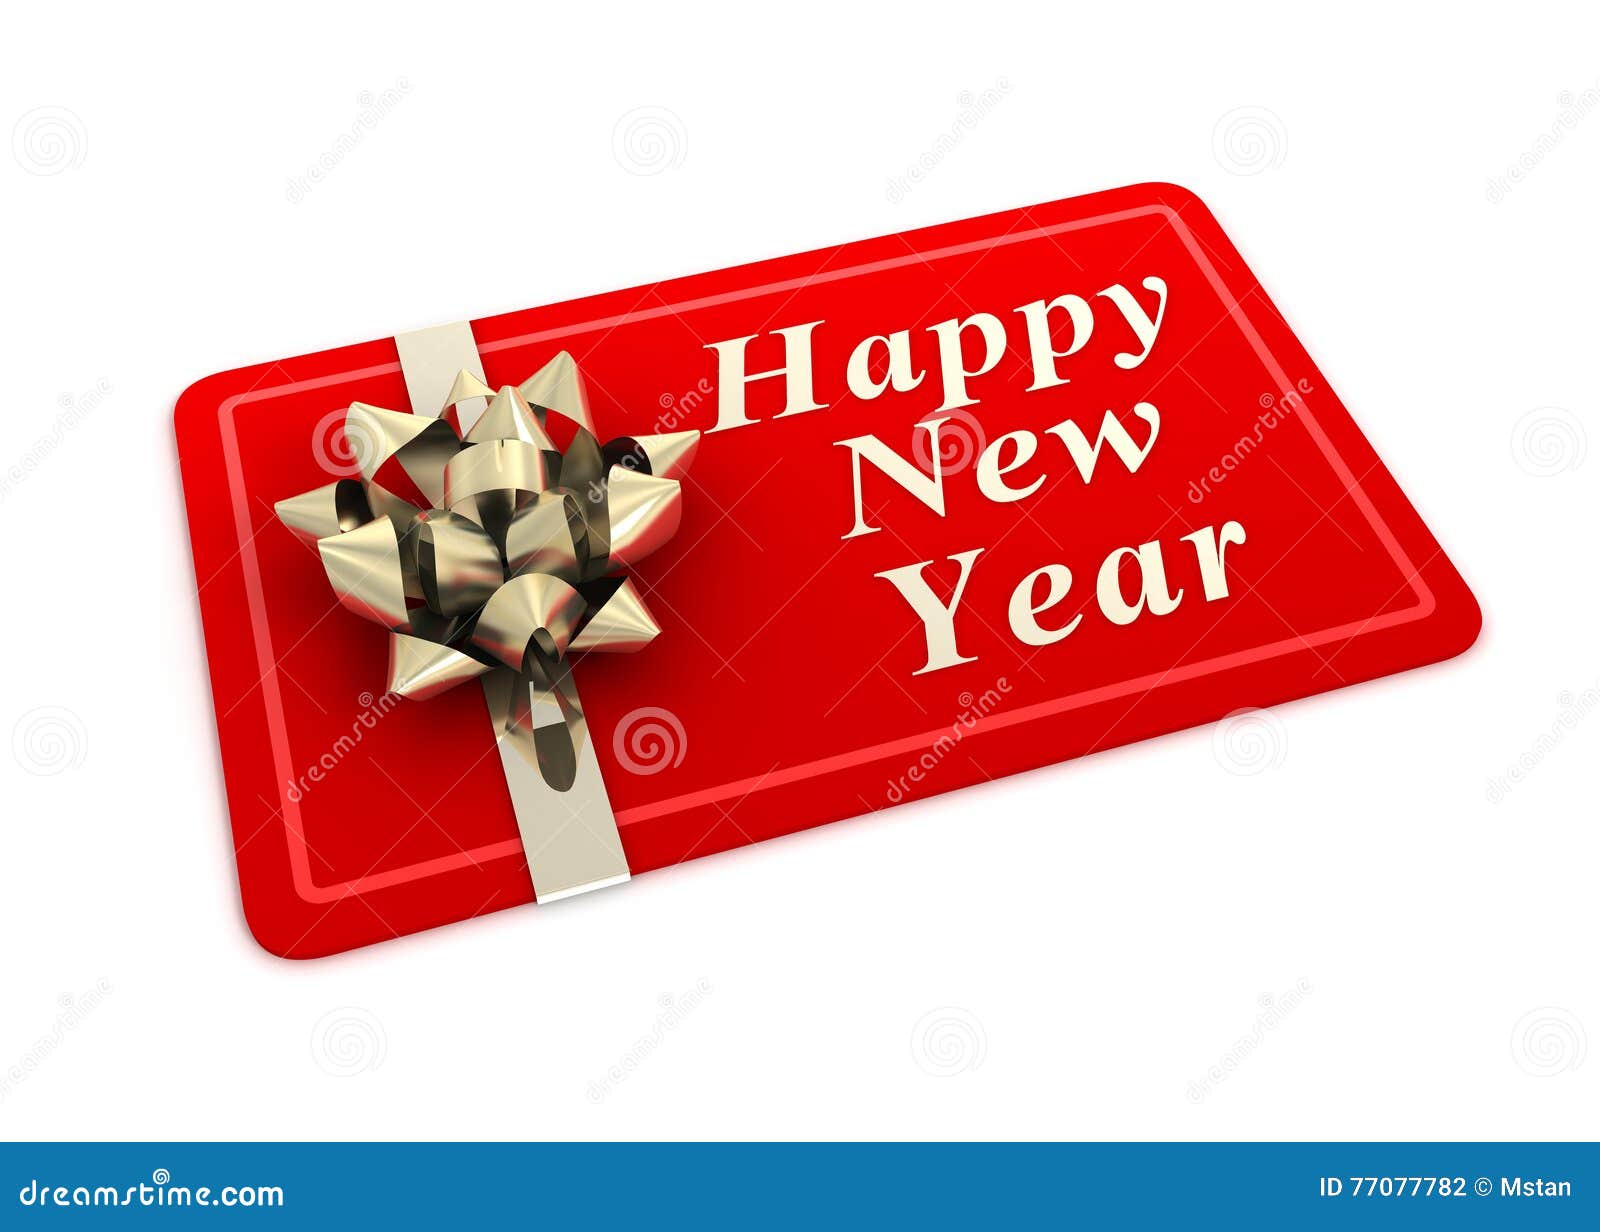 Happy New Year Gift Card Concept 3d Illustration Stock